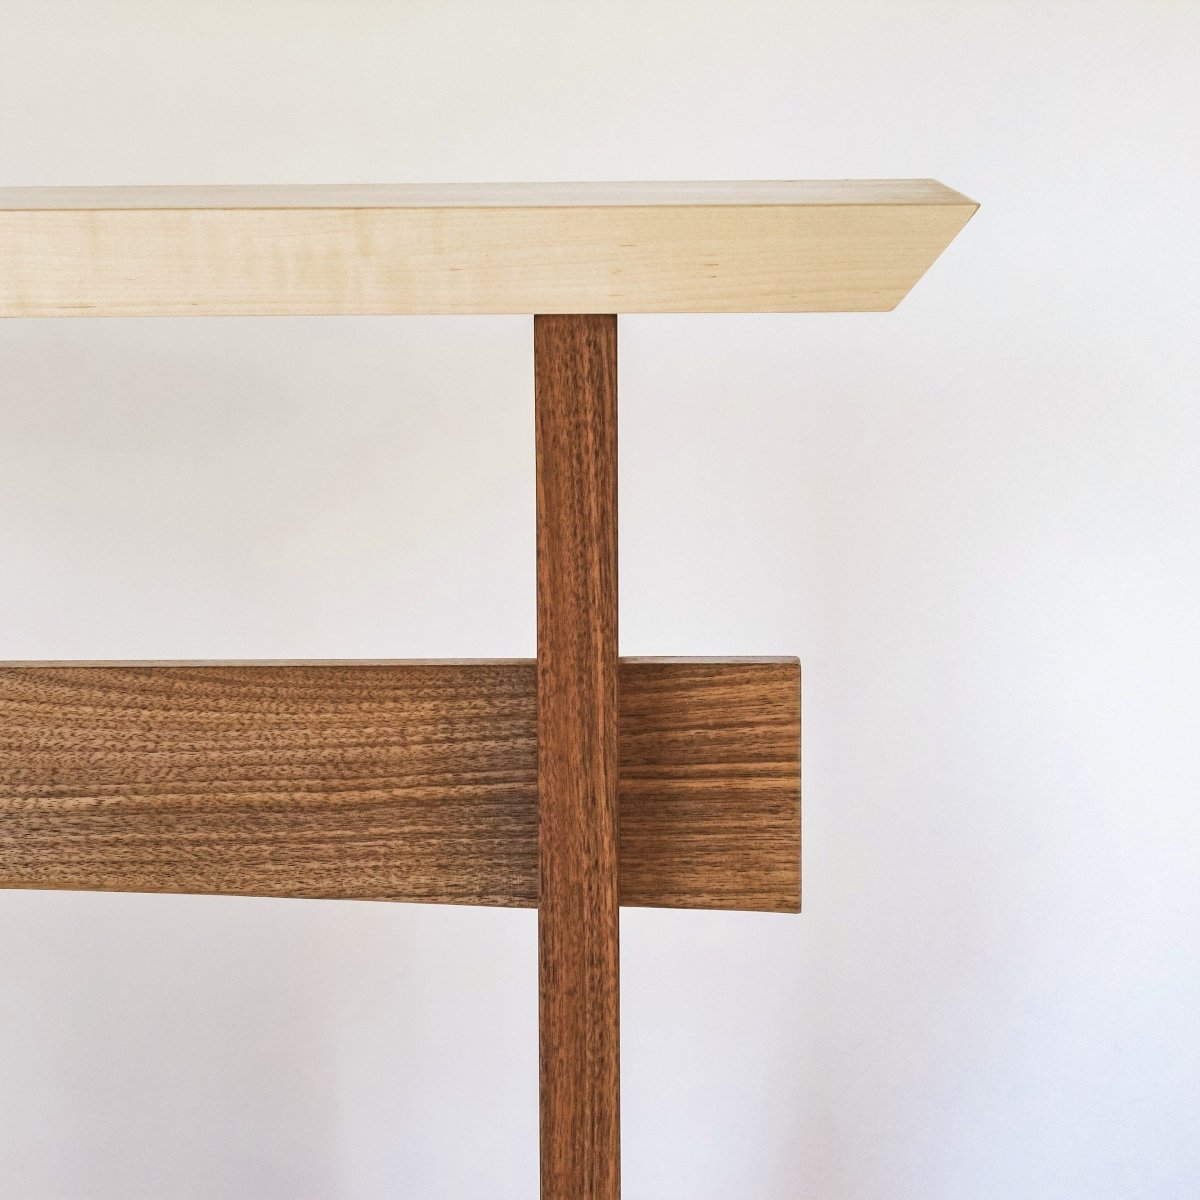 minimalist zen furniture design - hallway table created from tiger maple and walnut - console table design by Mokuzai Furniture